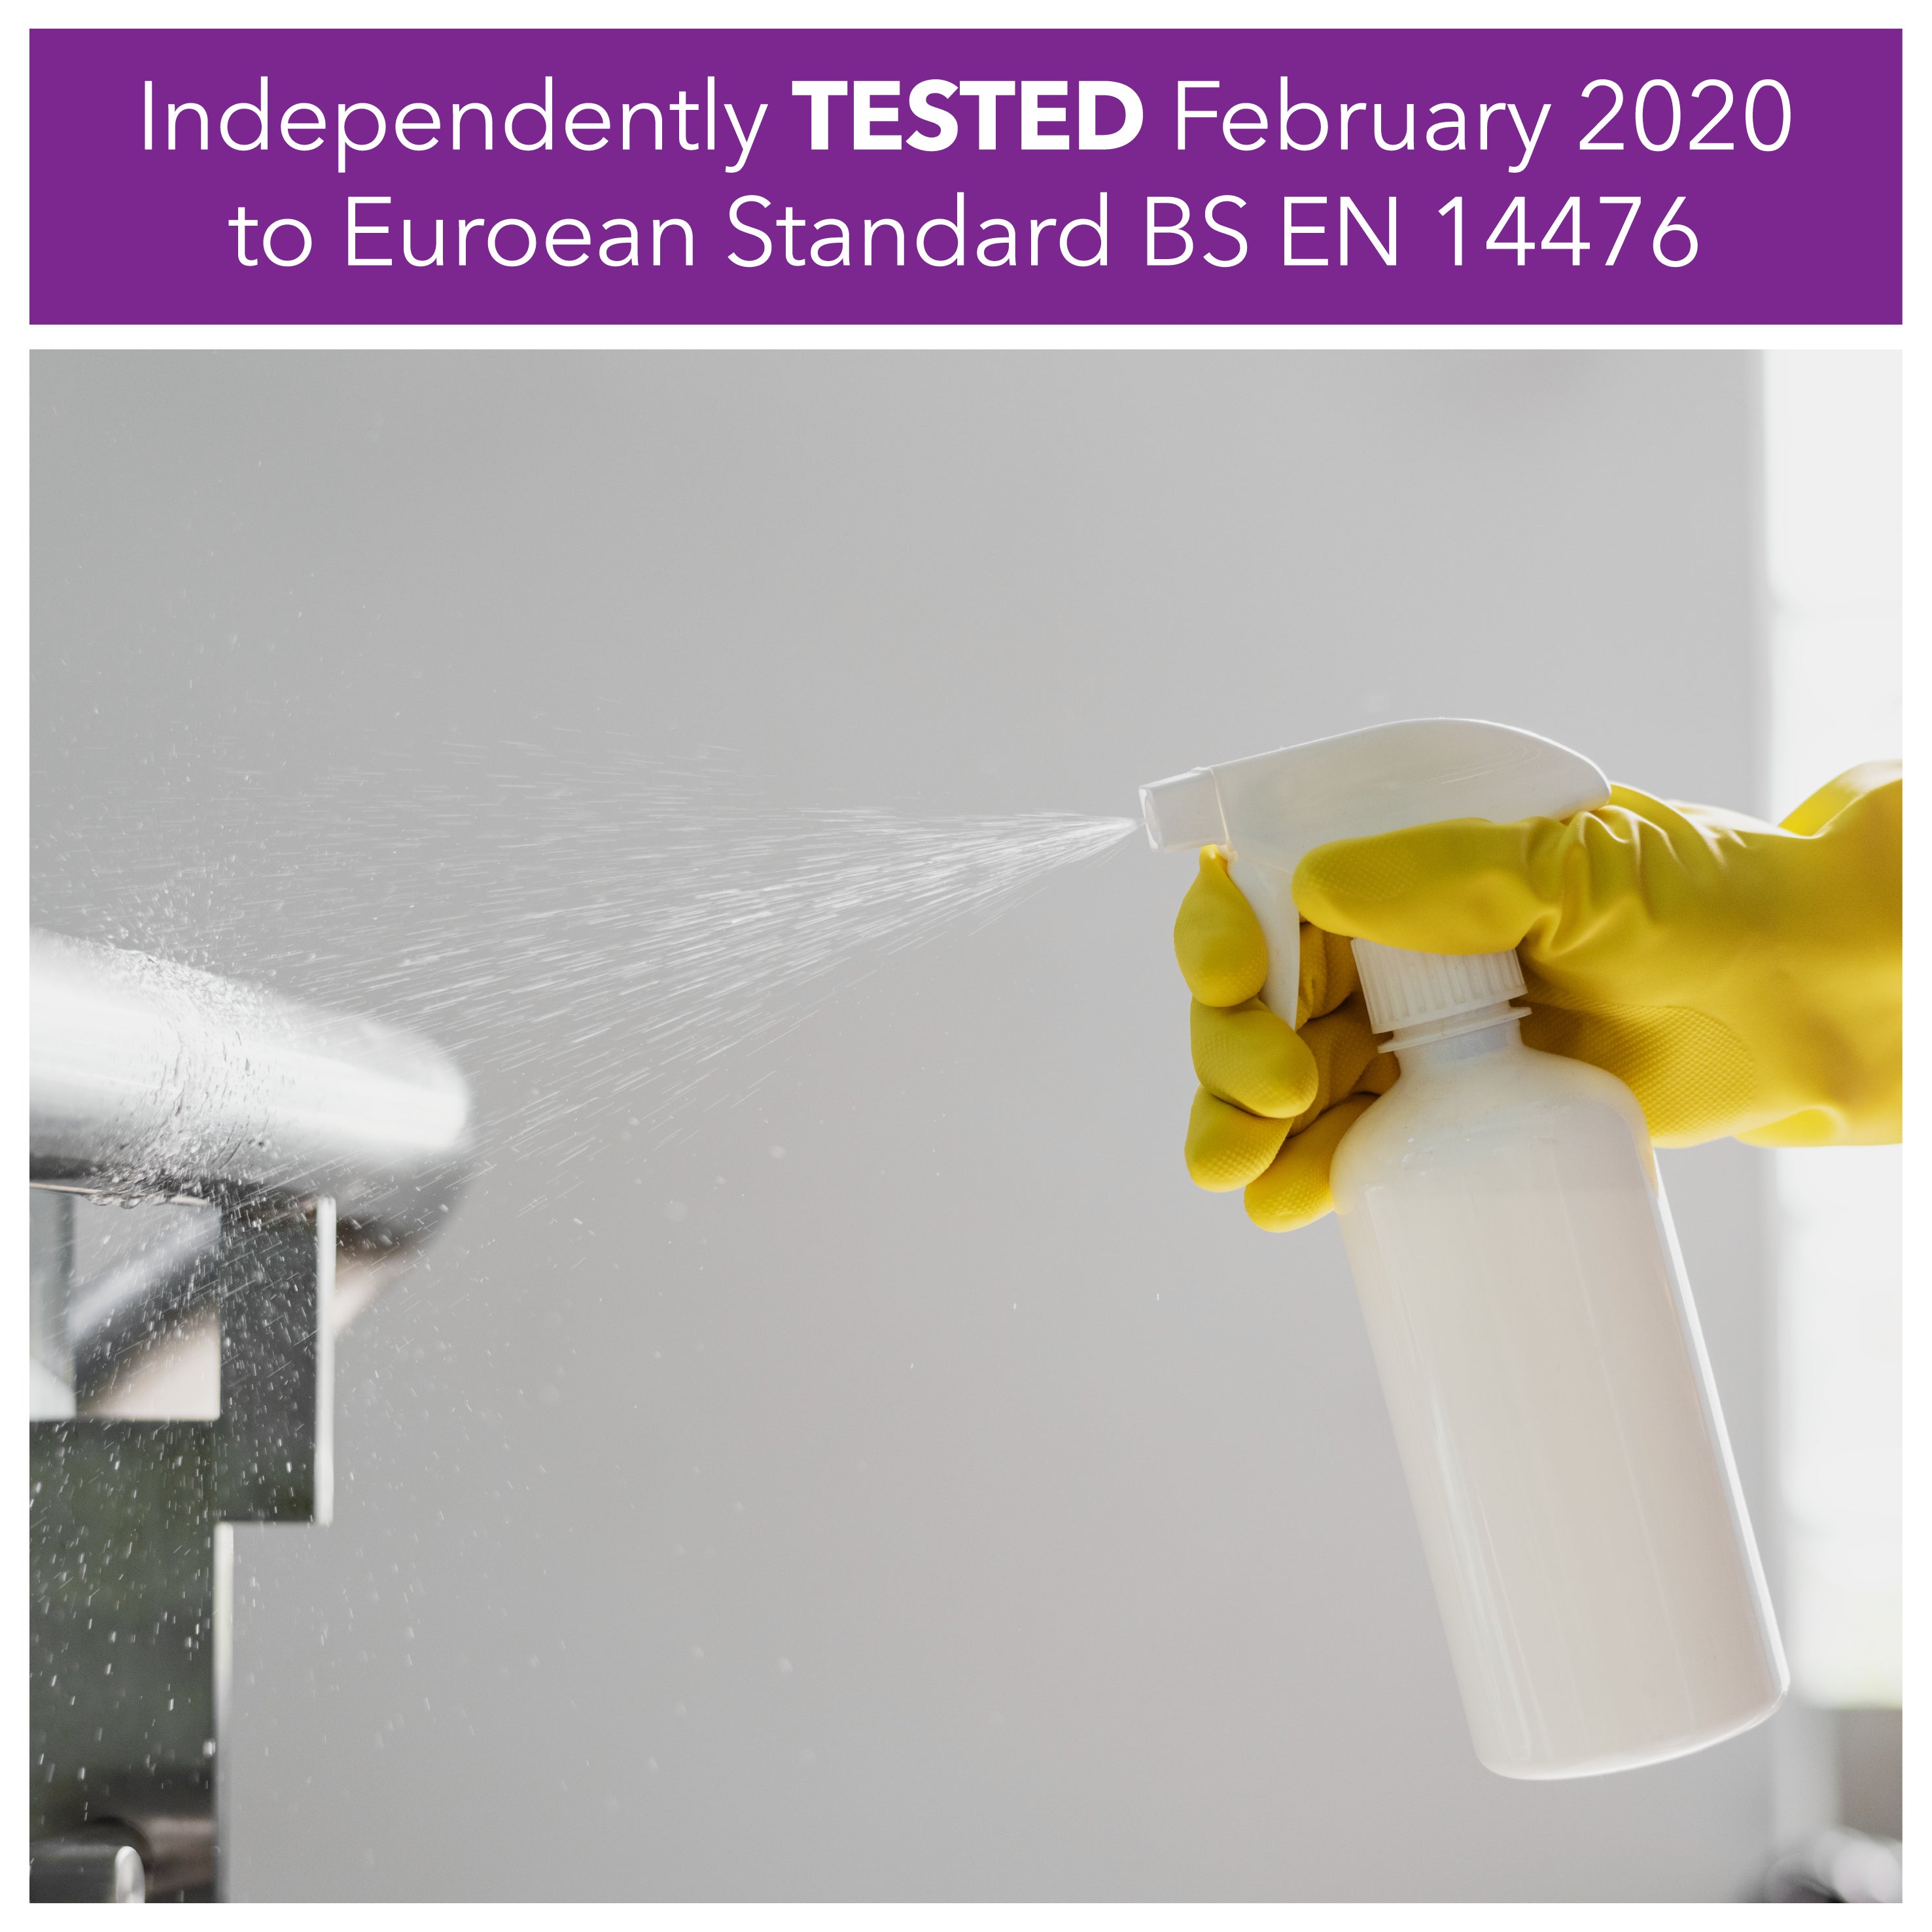 independently tested February 2020 to EU standard BS EN 14476